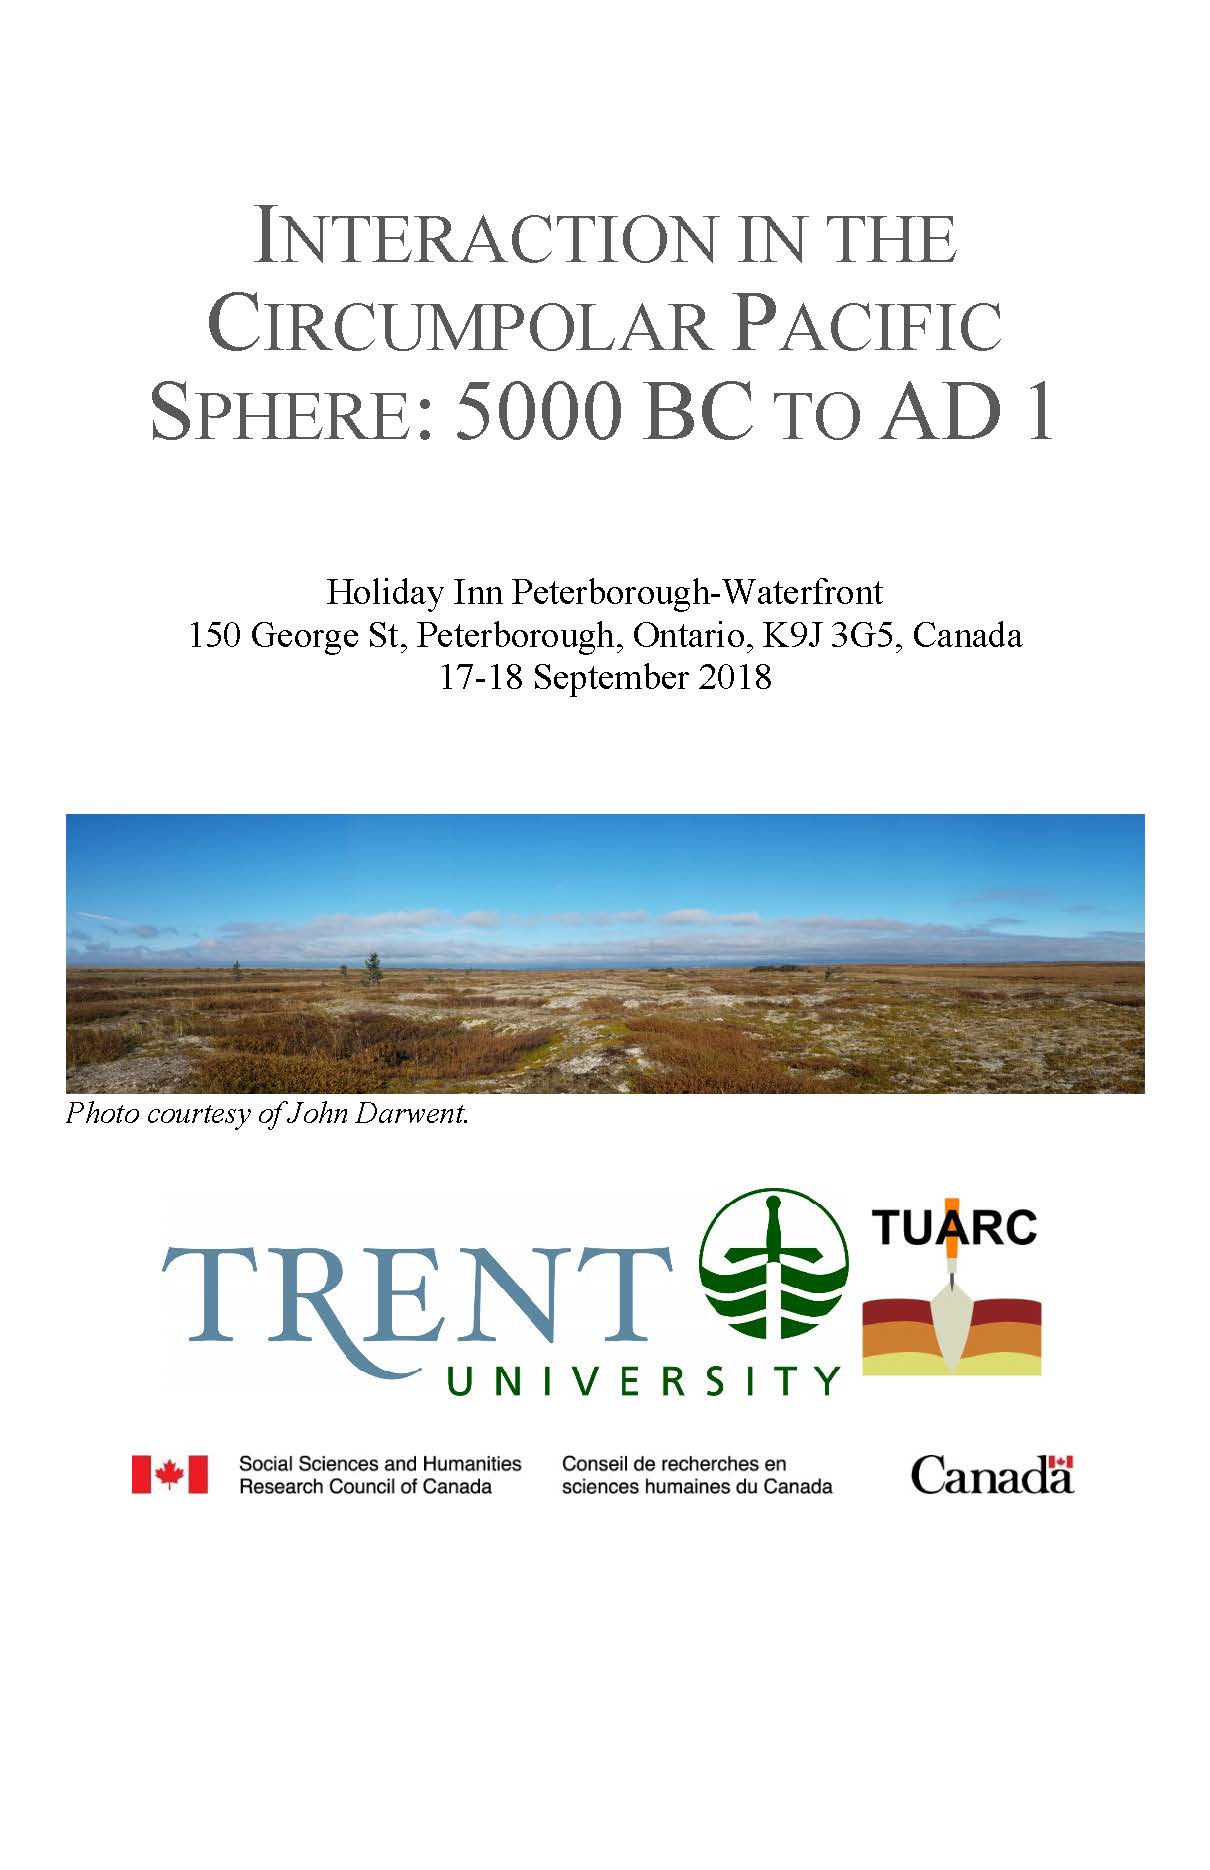 "Interaction in the Circumpolar Pacific Sphere: 5000 BC to AD 1" conference organized by Lisa Janz September 2019